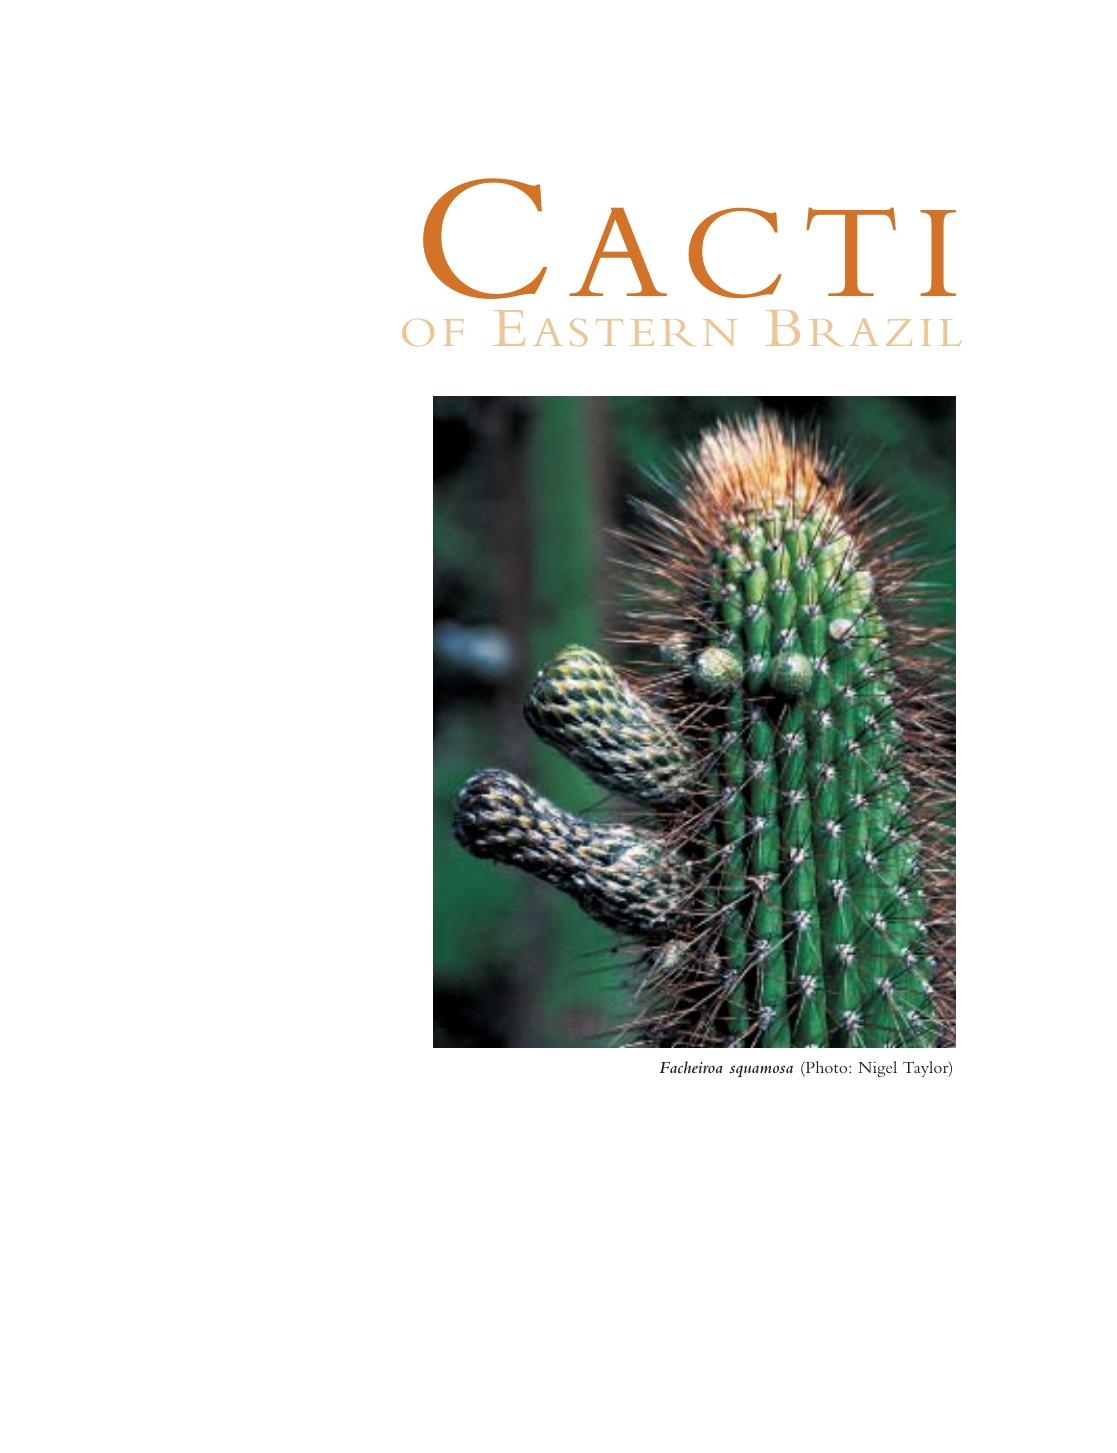 Cacti of Eastern Brazil by Taylor